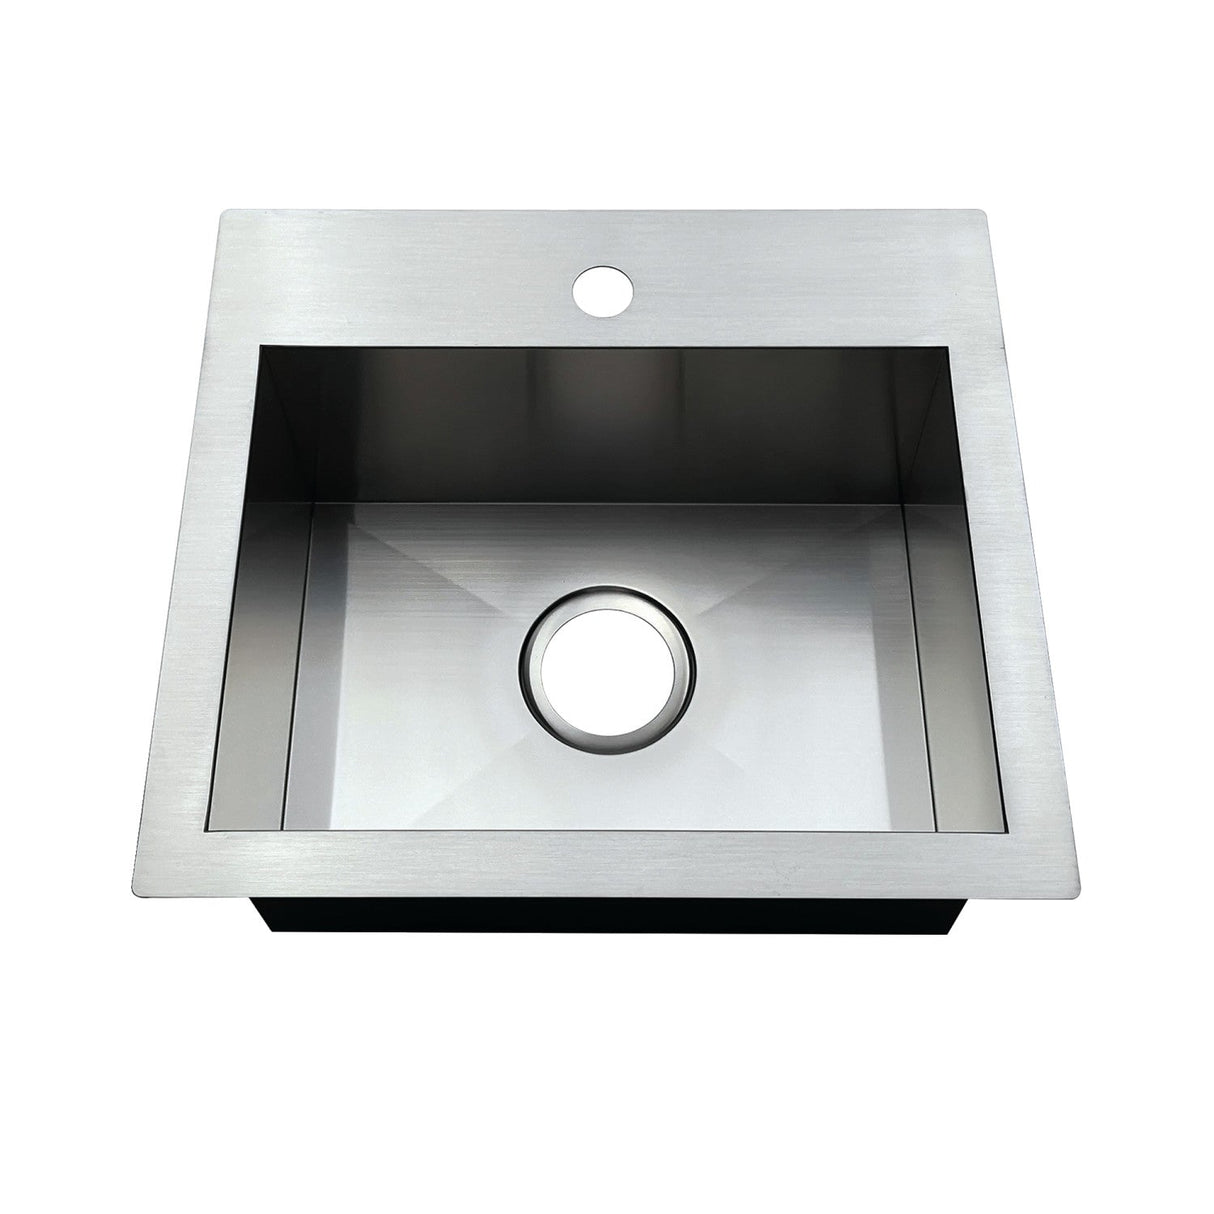 Uptowne GKDS191781 19-Inch Stainless Steel Undermount or Drop-In 1-Hole Single Bowl Dual-Mount Kitchen Sink, Brushed